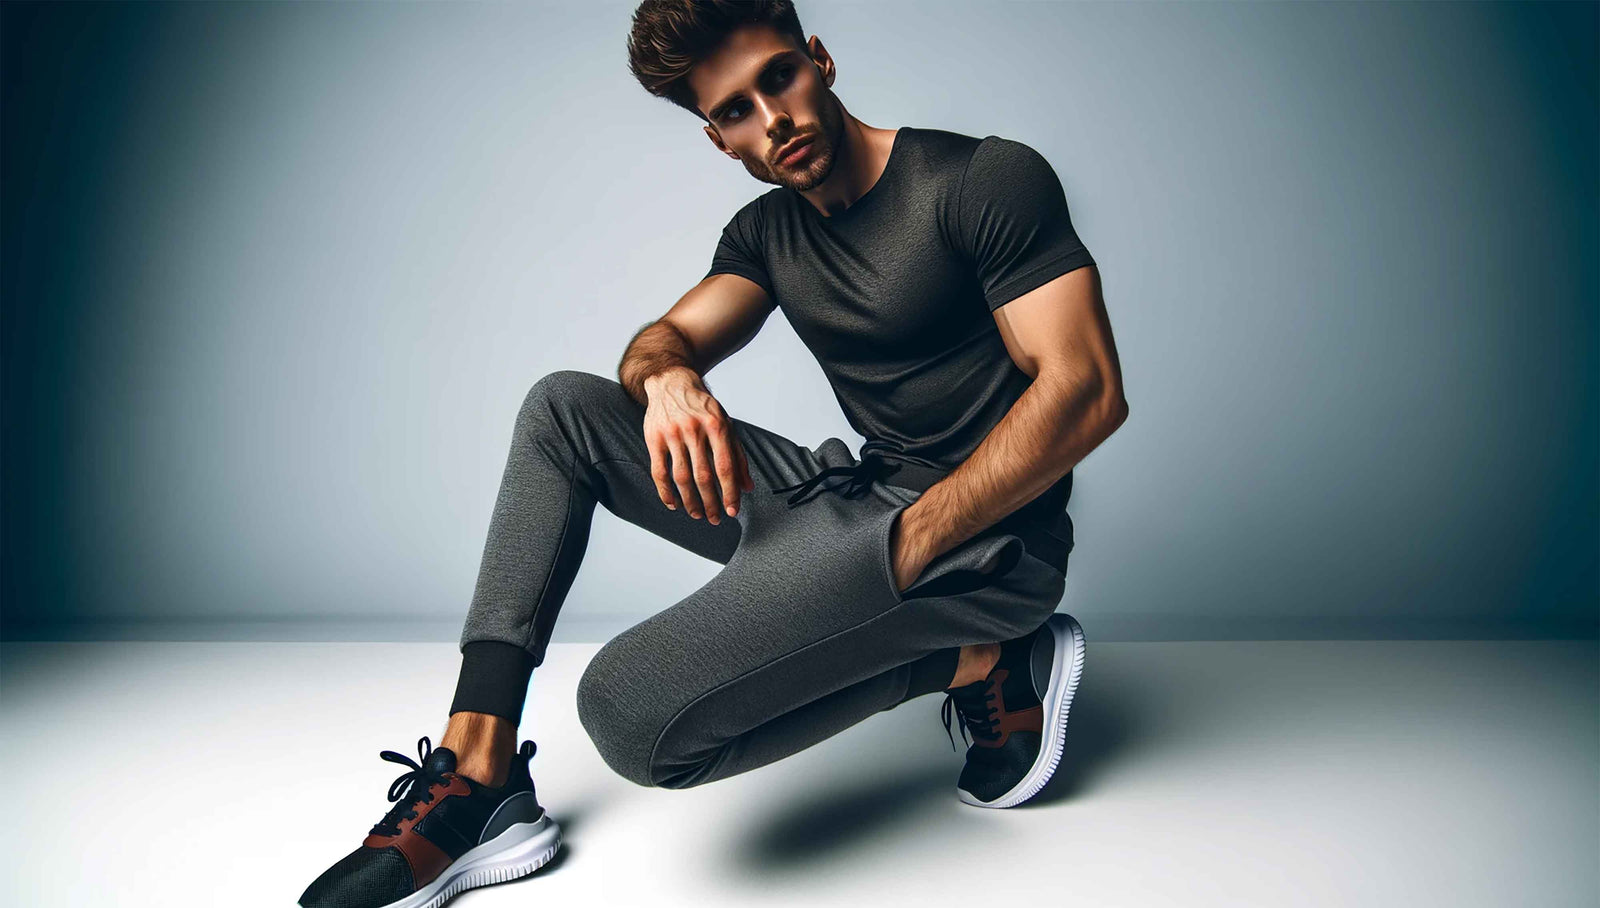 Sporty vs Stylish: Exploring the Key Differences Between Athletic Wear and Athleisure